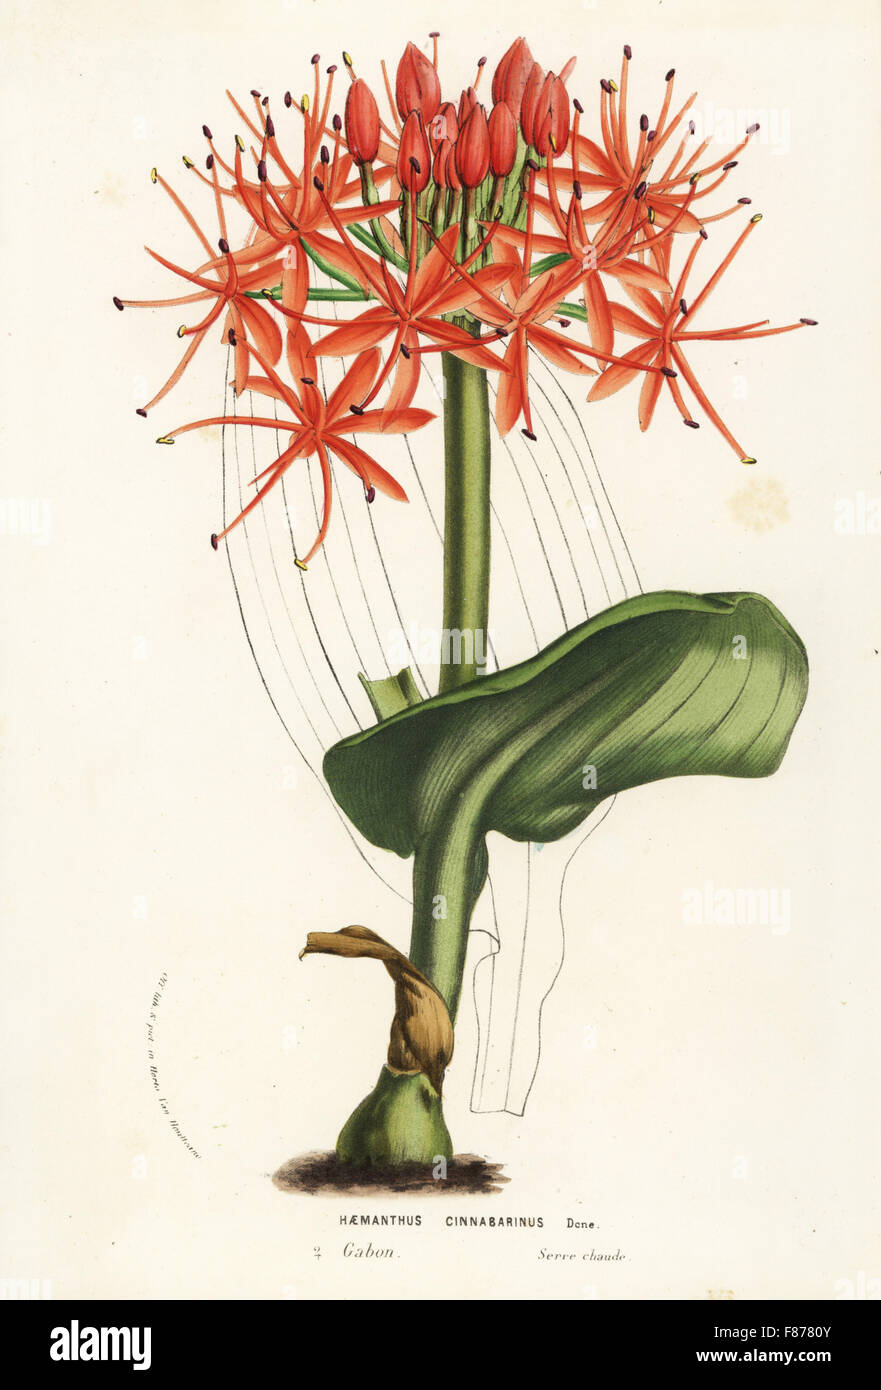 Scadoxus cinnabarinus from Gabon, Africa (Haemanthus cinnabarinus). Handcoloured lithograph from Louis van Houtte and Charles Lemaire's Flowers of the Gardens and Hothouses of Europe, Flore des Serres et des Jardins de l'Europe, Ghent, Belgium, 1857. Stock Photo